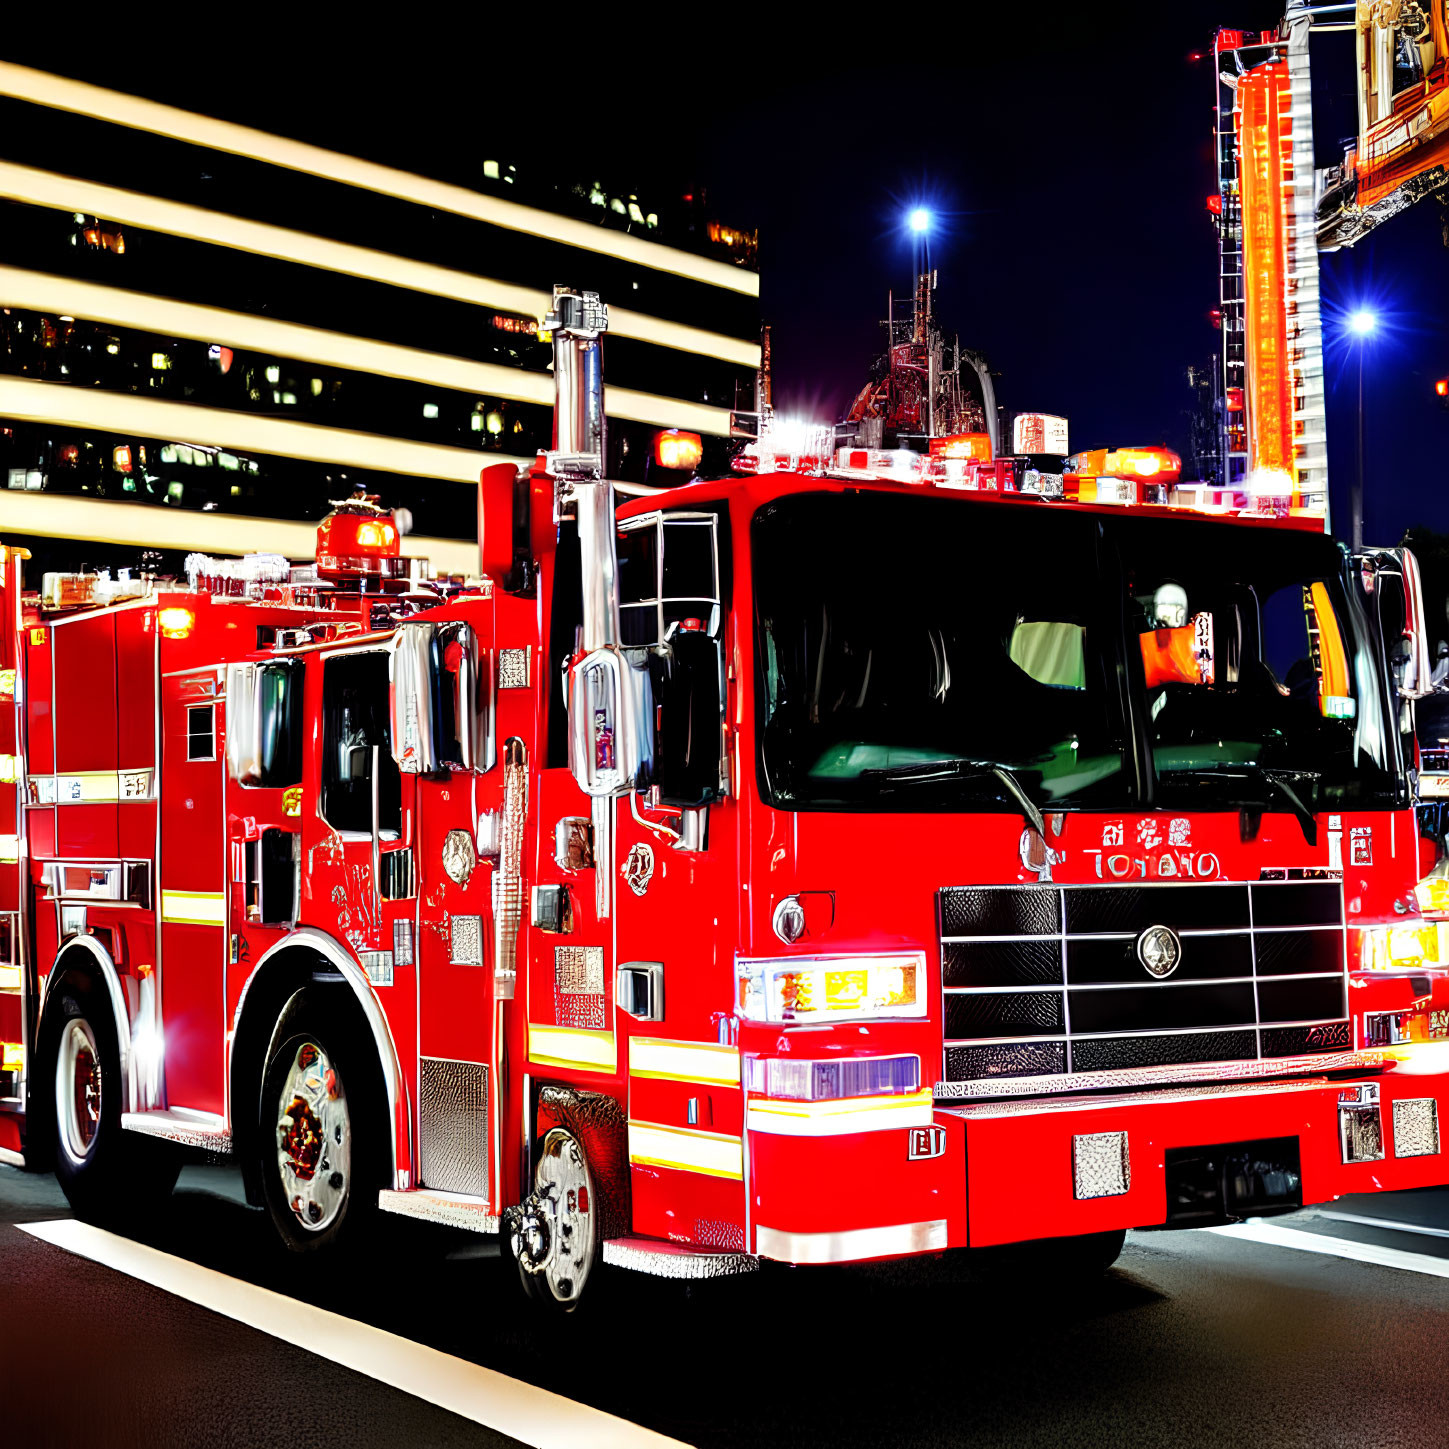 Red Fire Truck Parked at Night with Lights On, Reflective Surfaces, and Illuminated Buildings